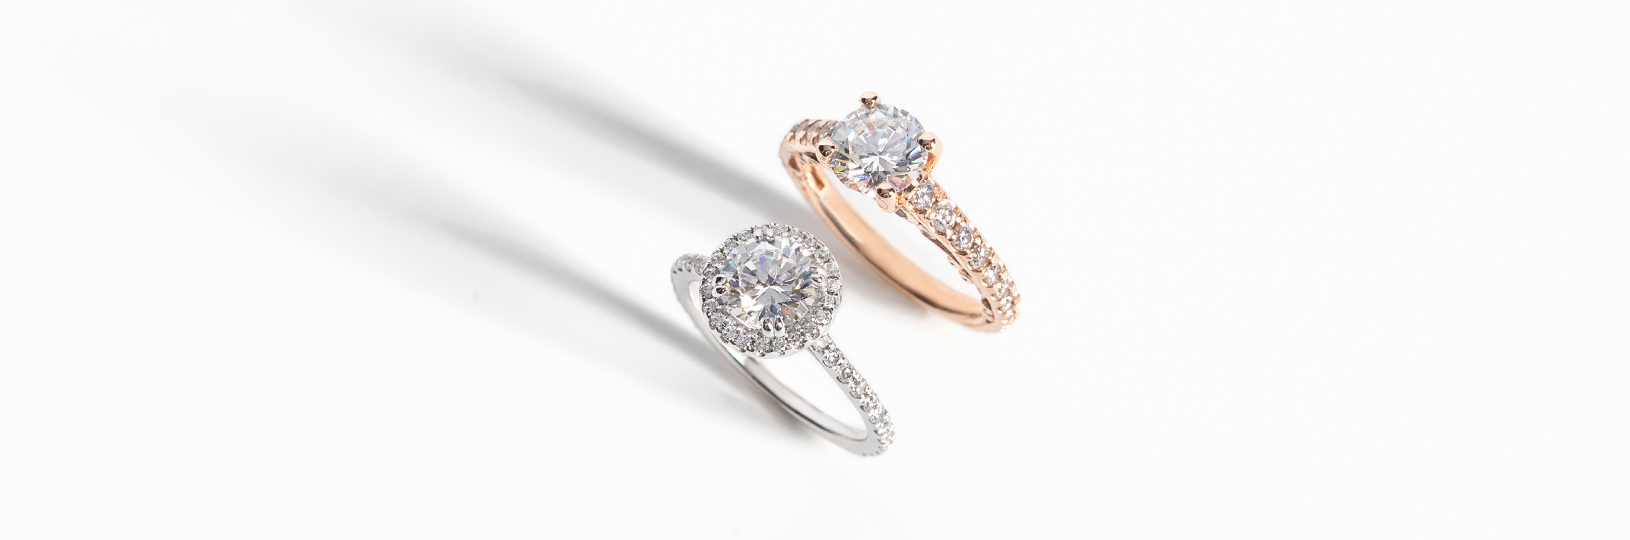 Dainty engagement ring styles